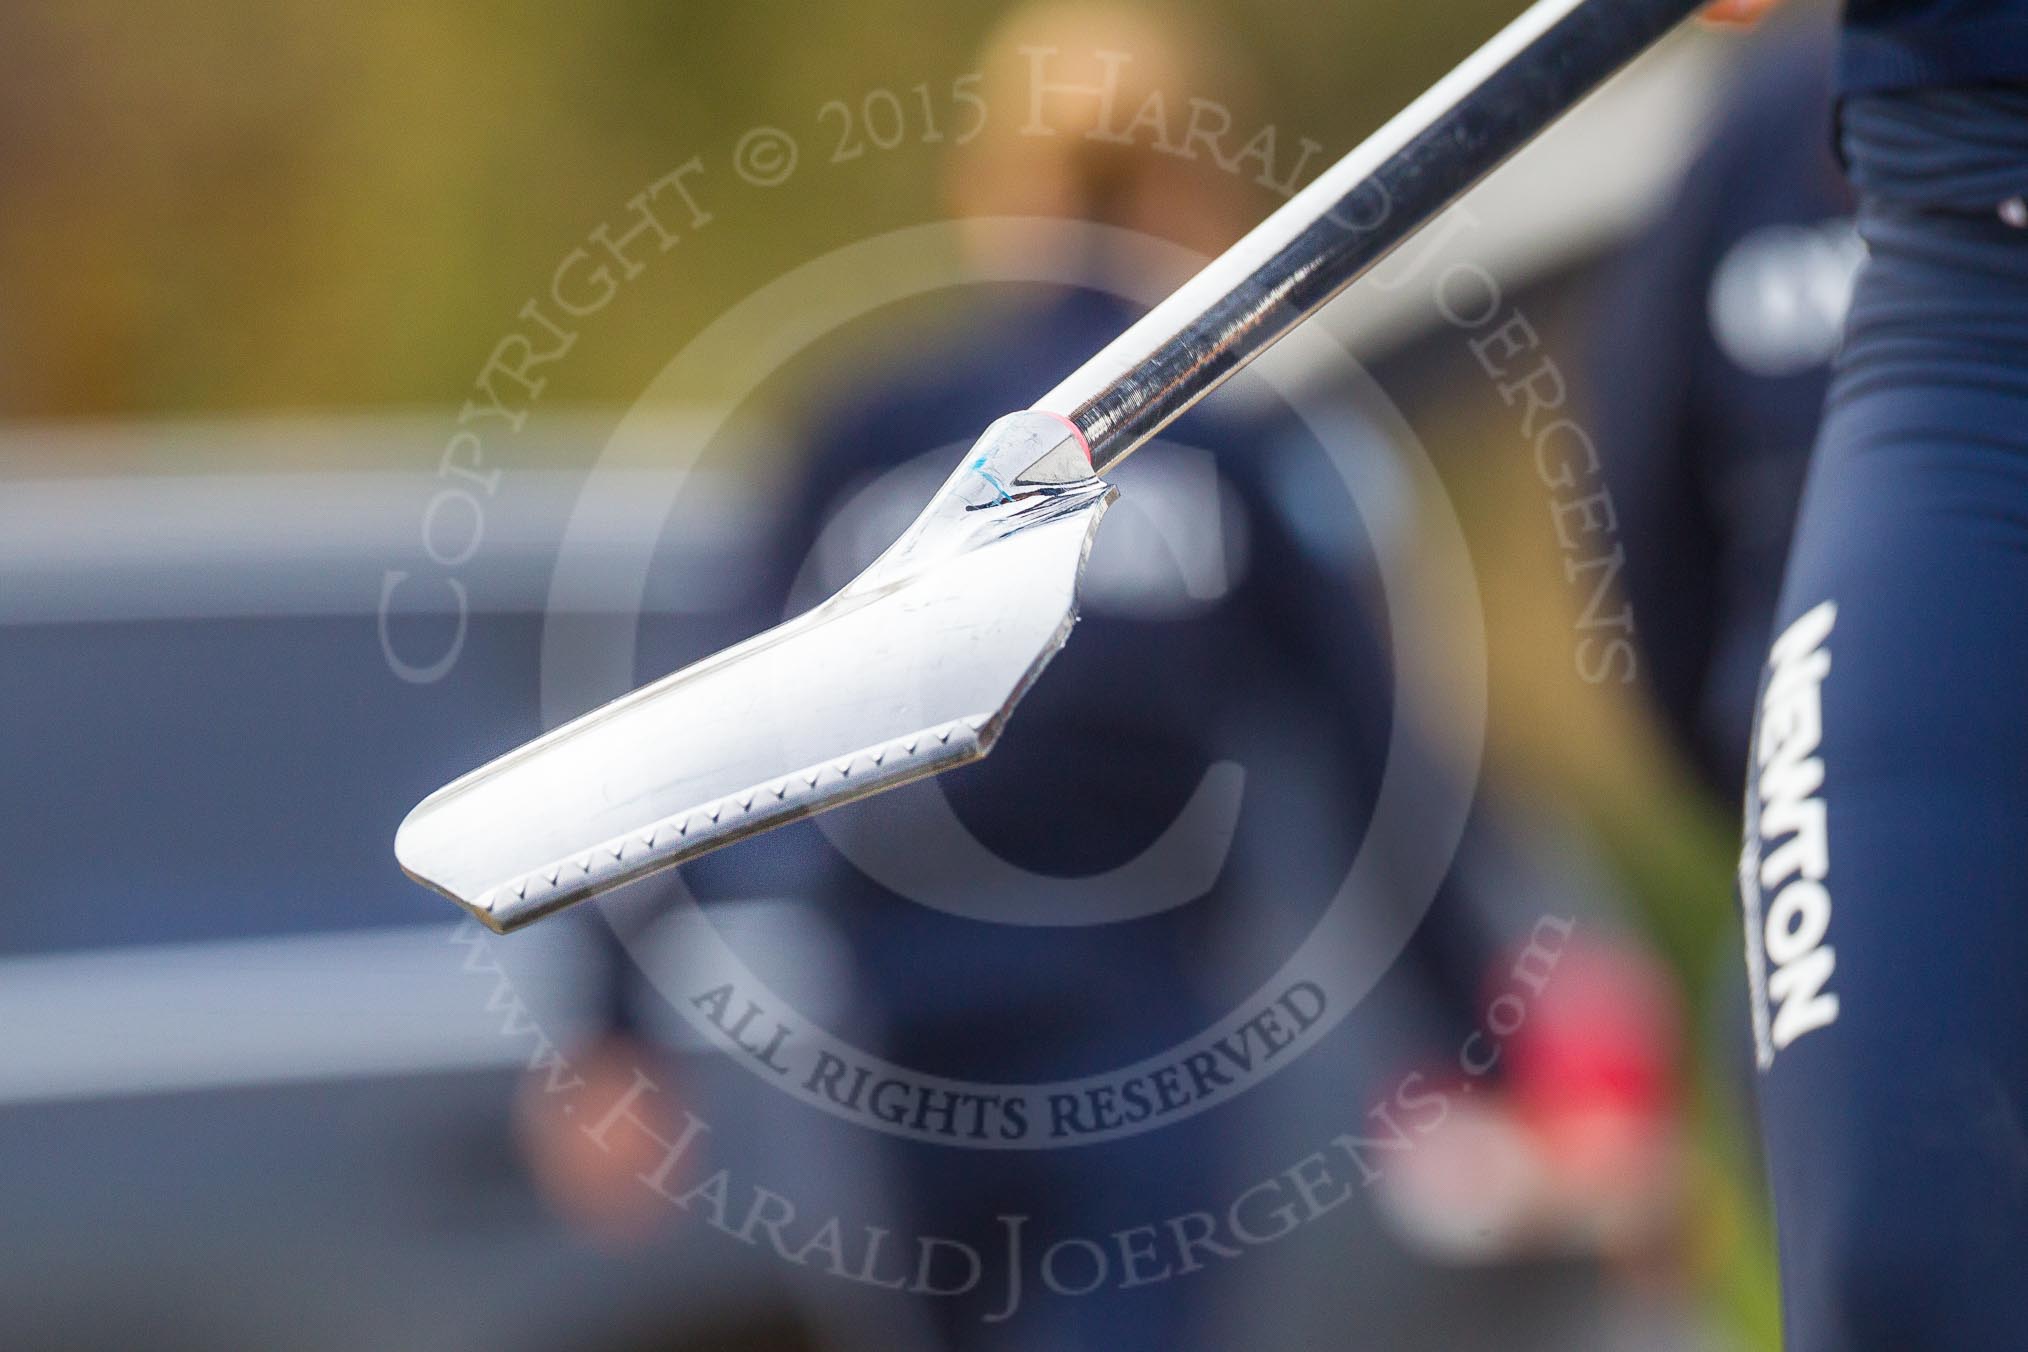 The Boat Race season 2016 - OUWBC training Wallingford: OUWBC oars - the ladies mean business!.
River Thames,
Wallingford,
Oxfordshire,

on 29 February 2016 at 14:36, image #10